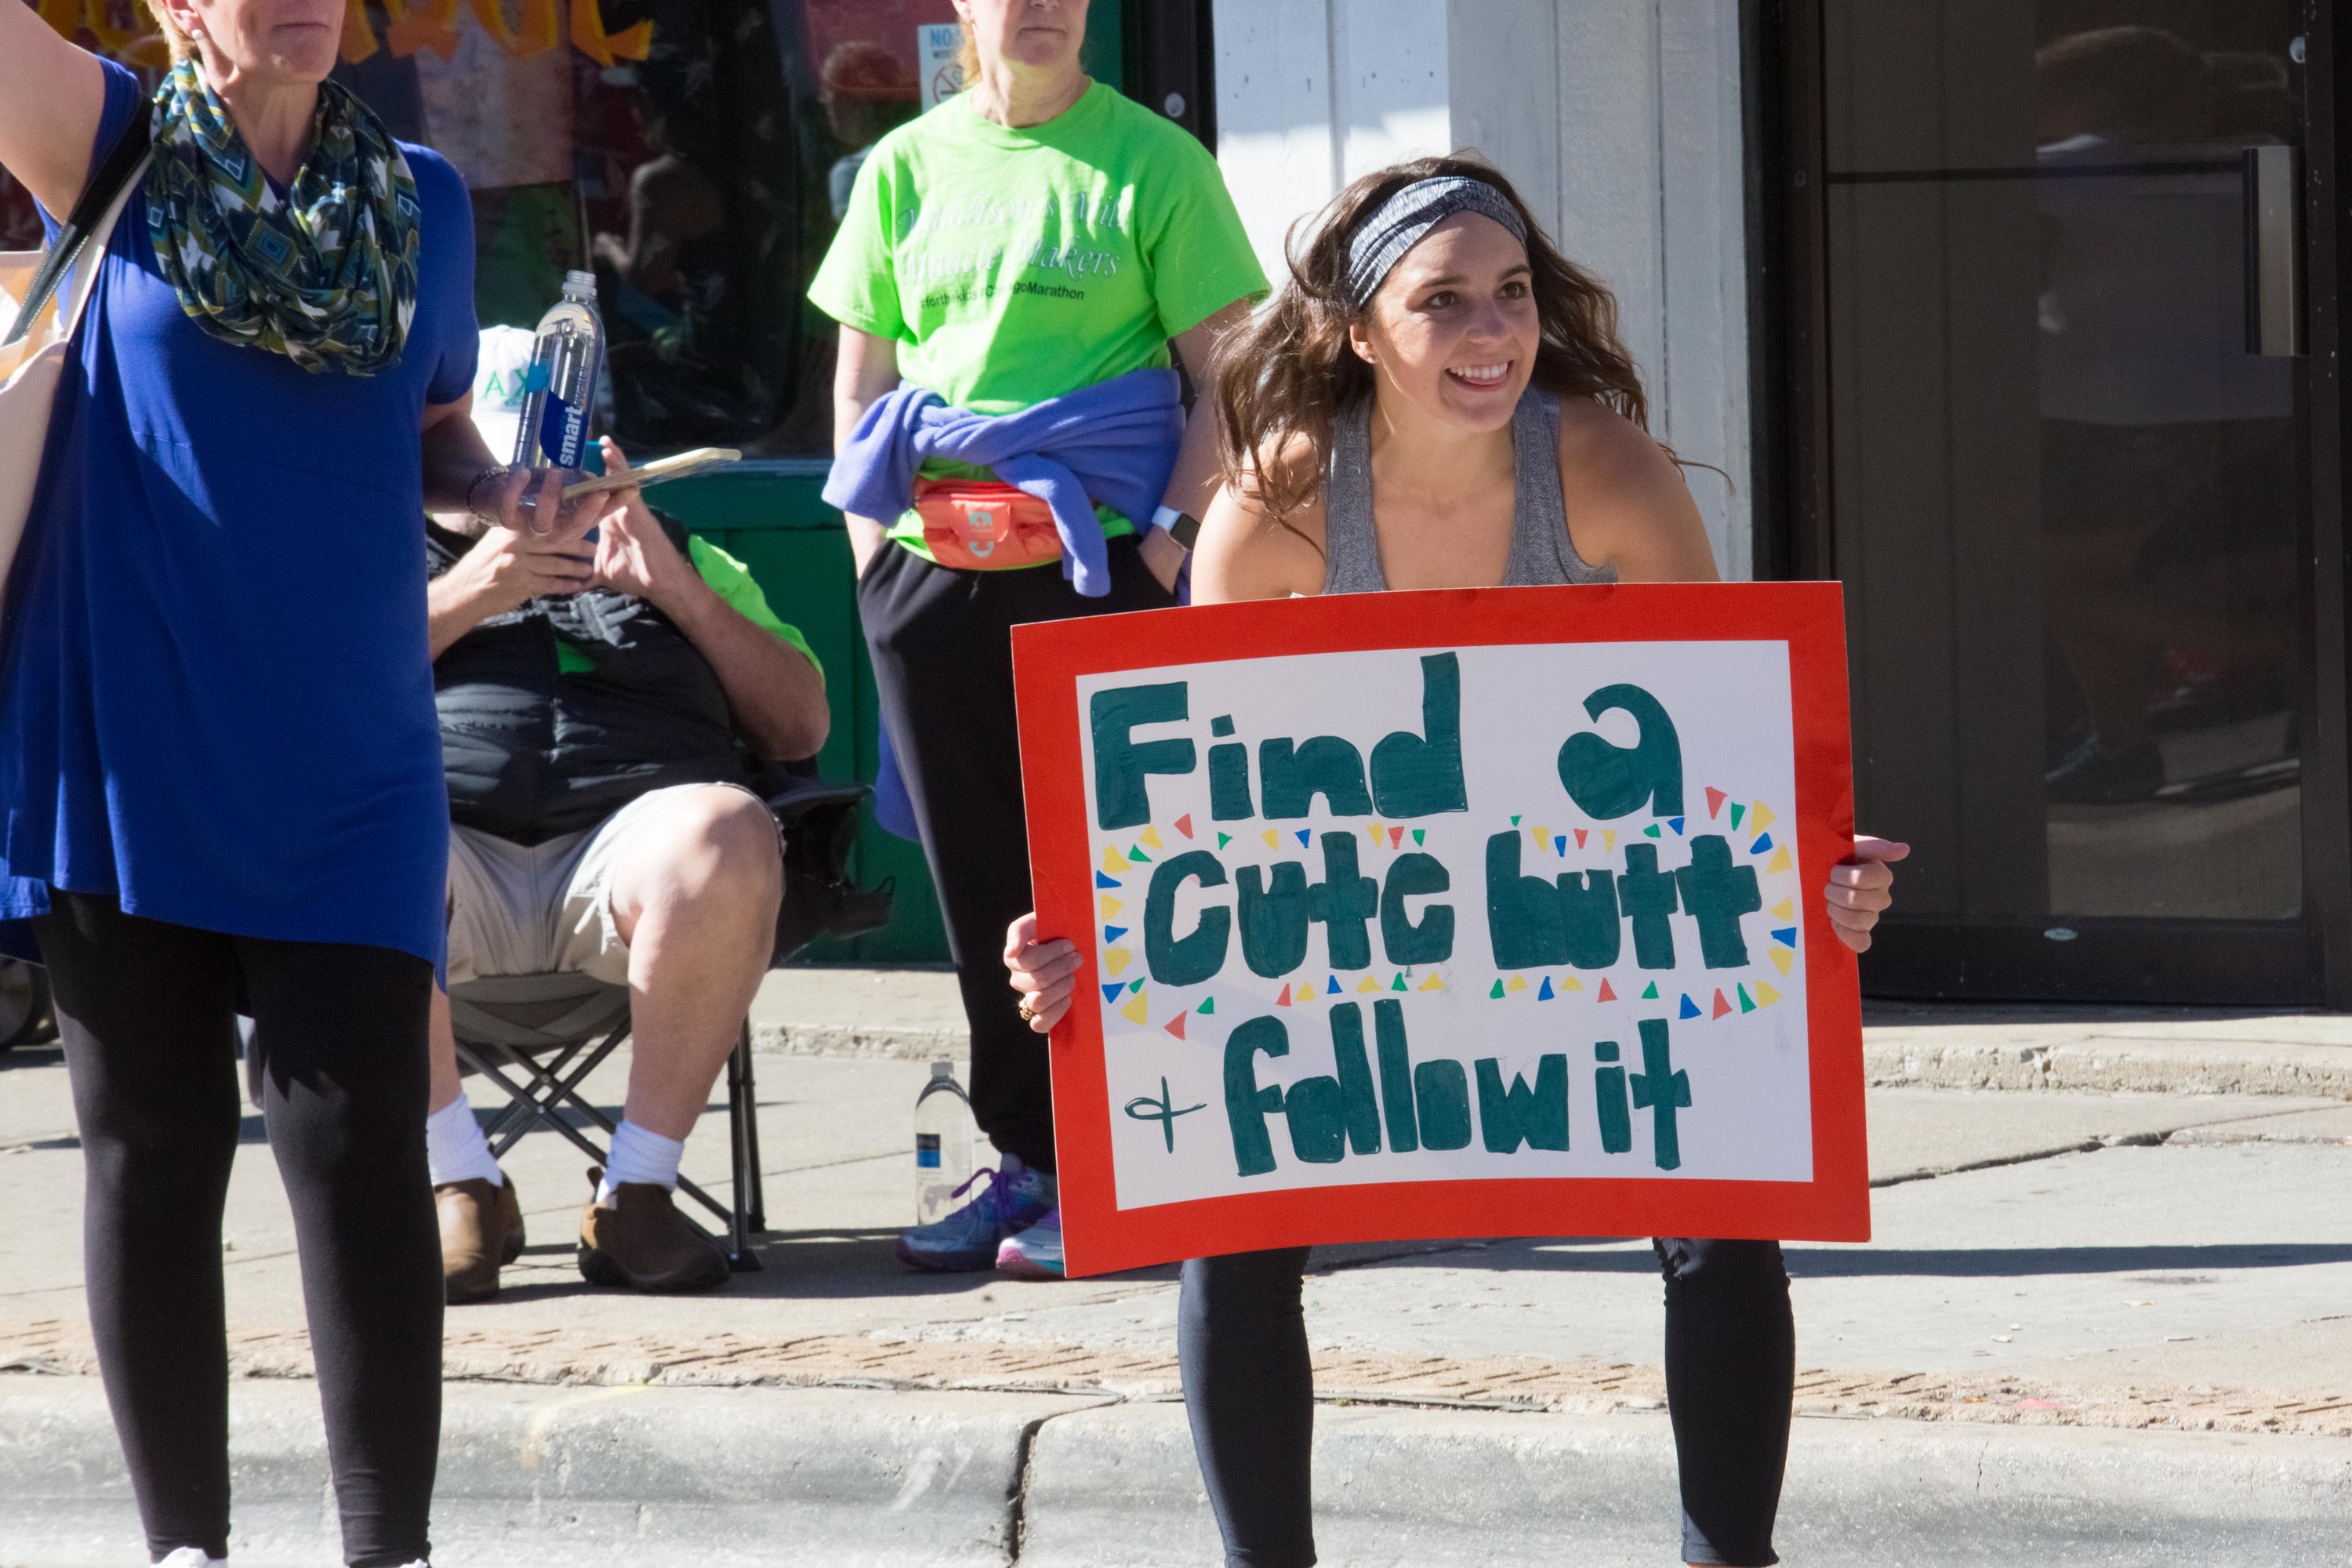 The funniest signs we saw at the Chicago Marathon 2017